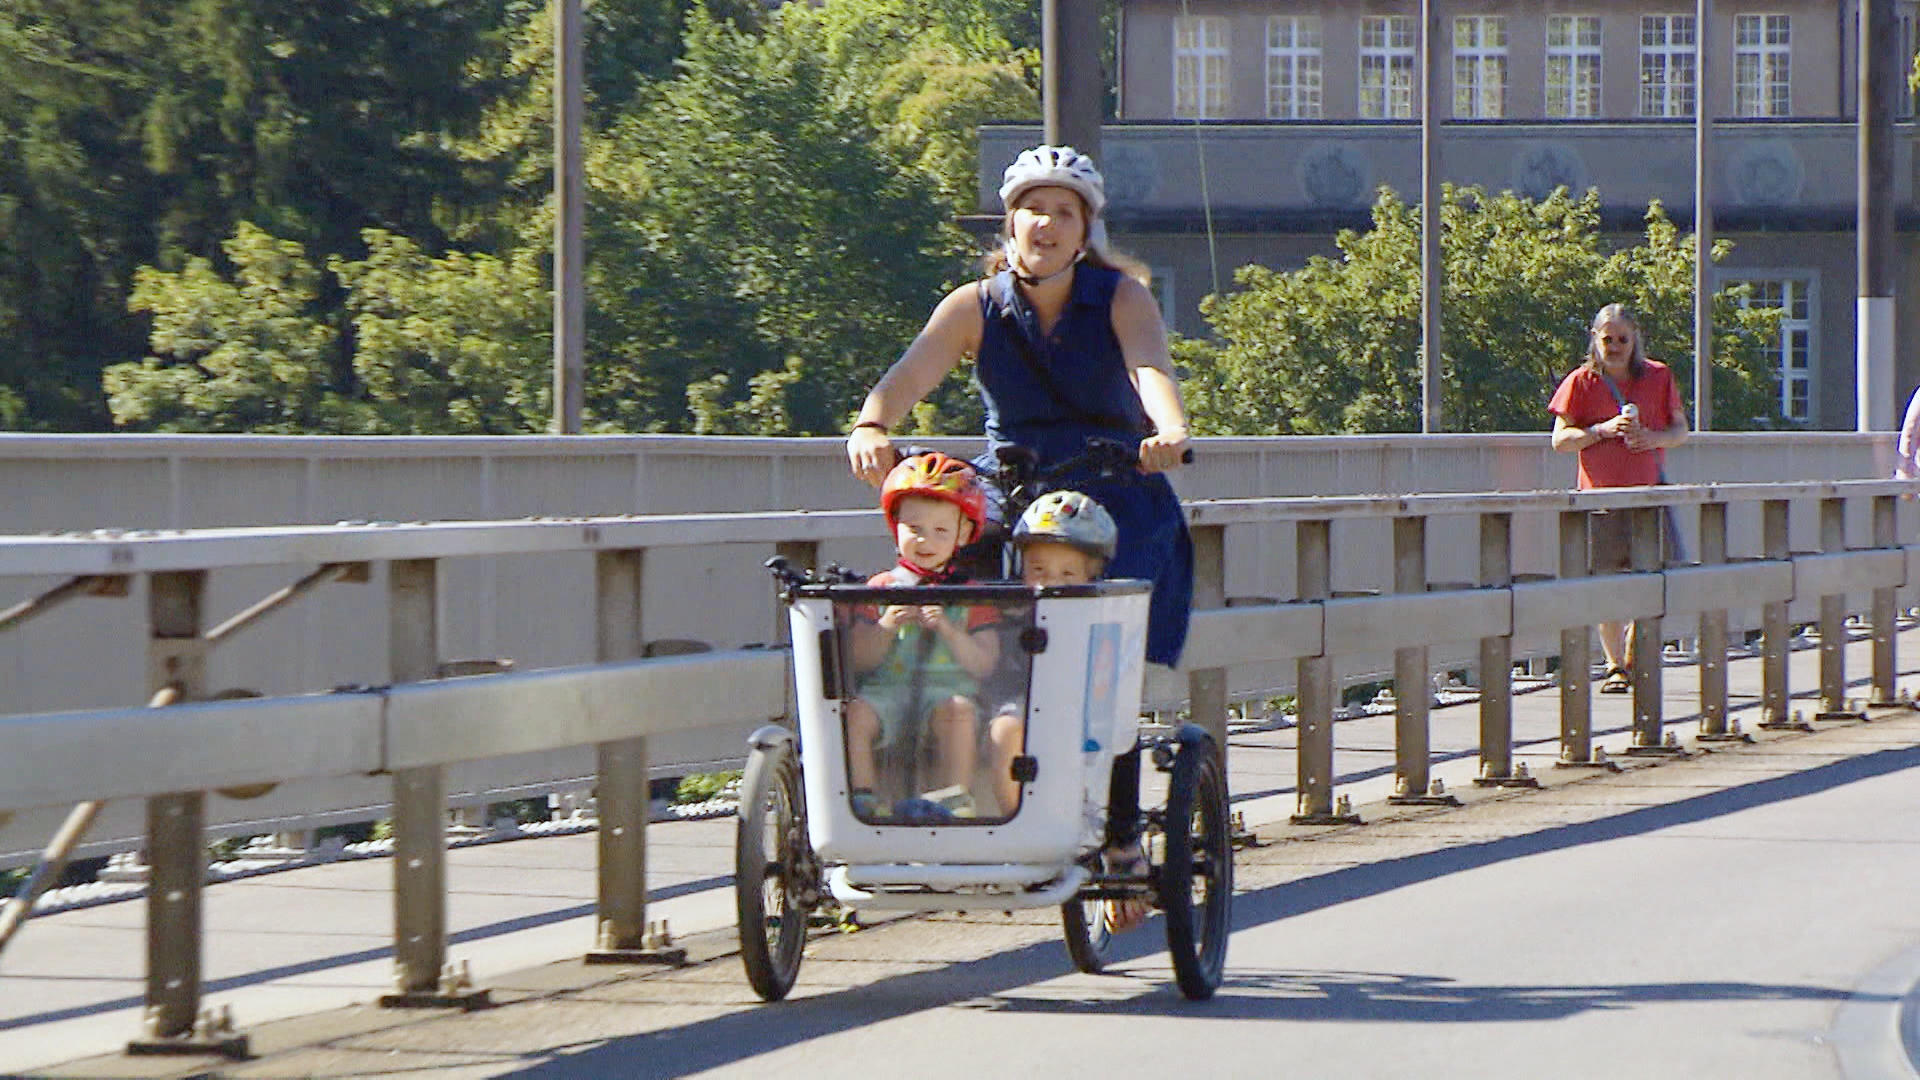 A mother pedaling her two kids in a front basket attached to her bike